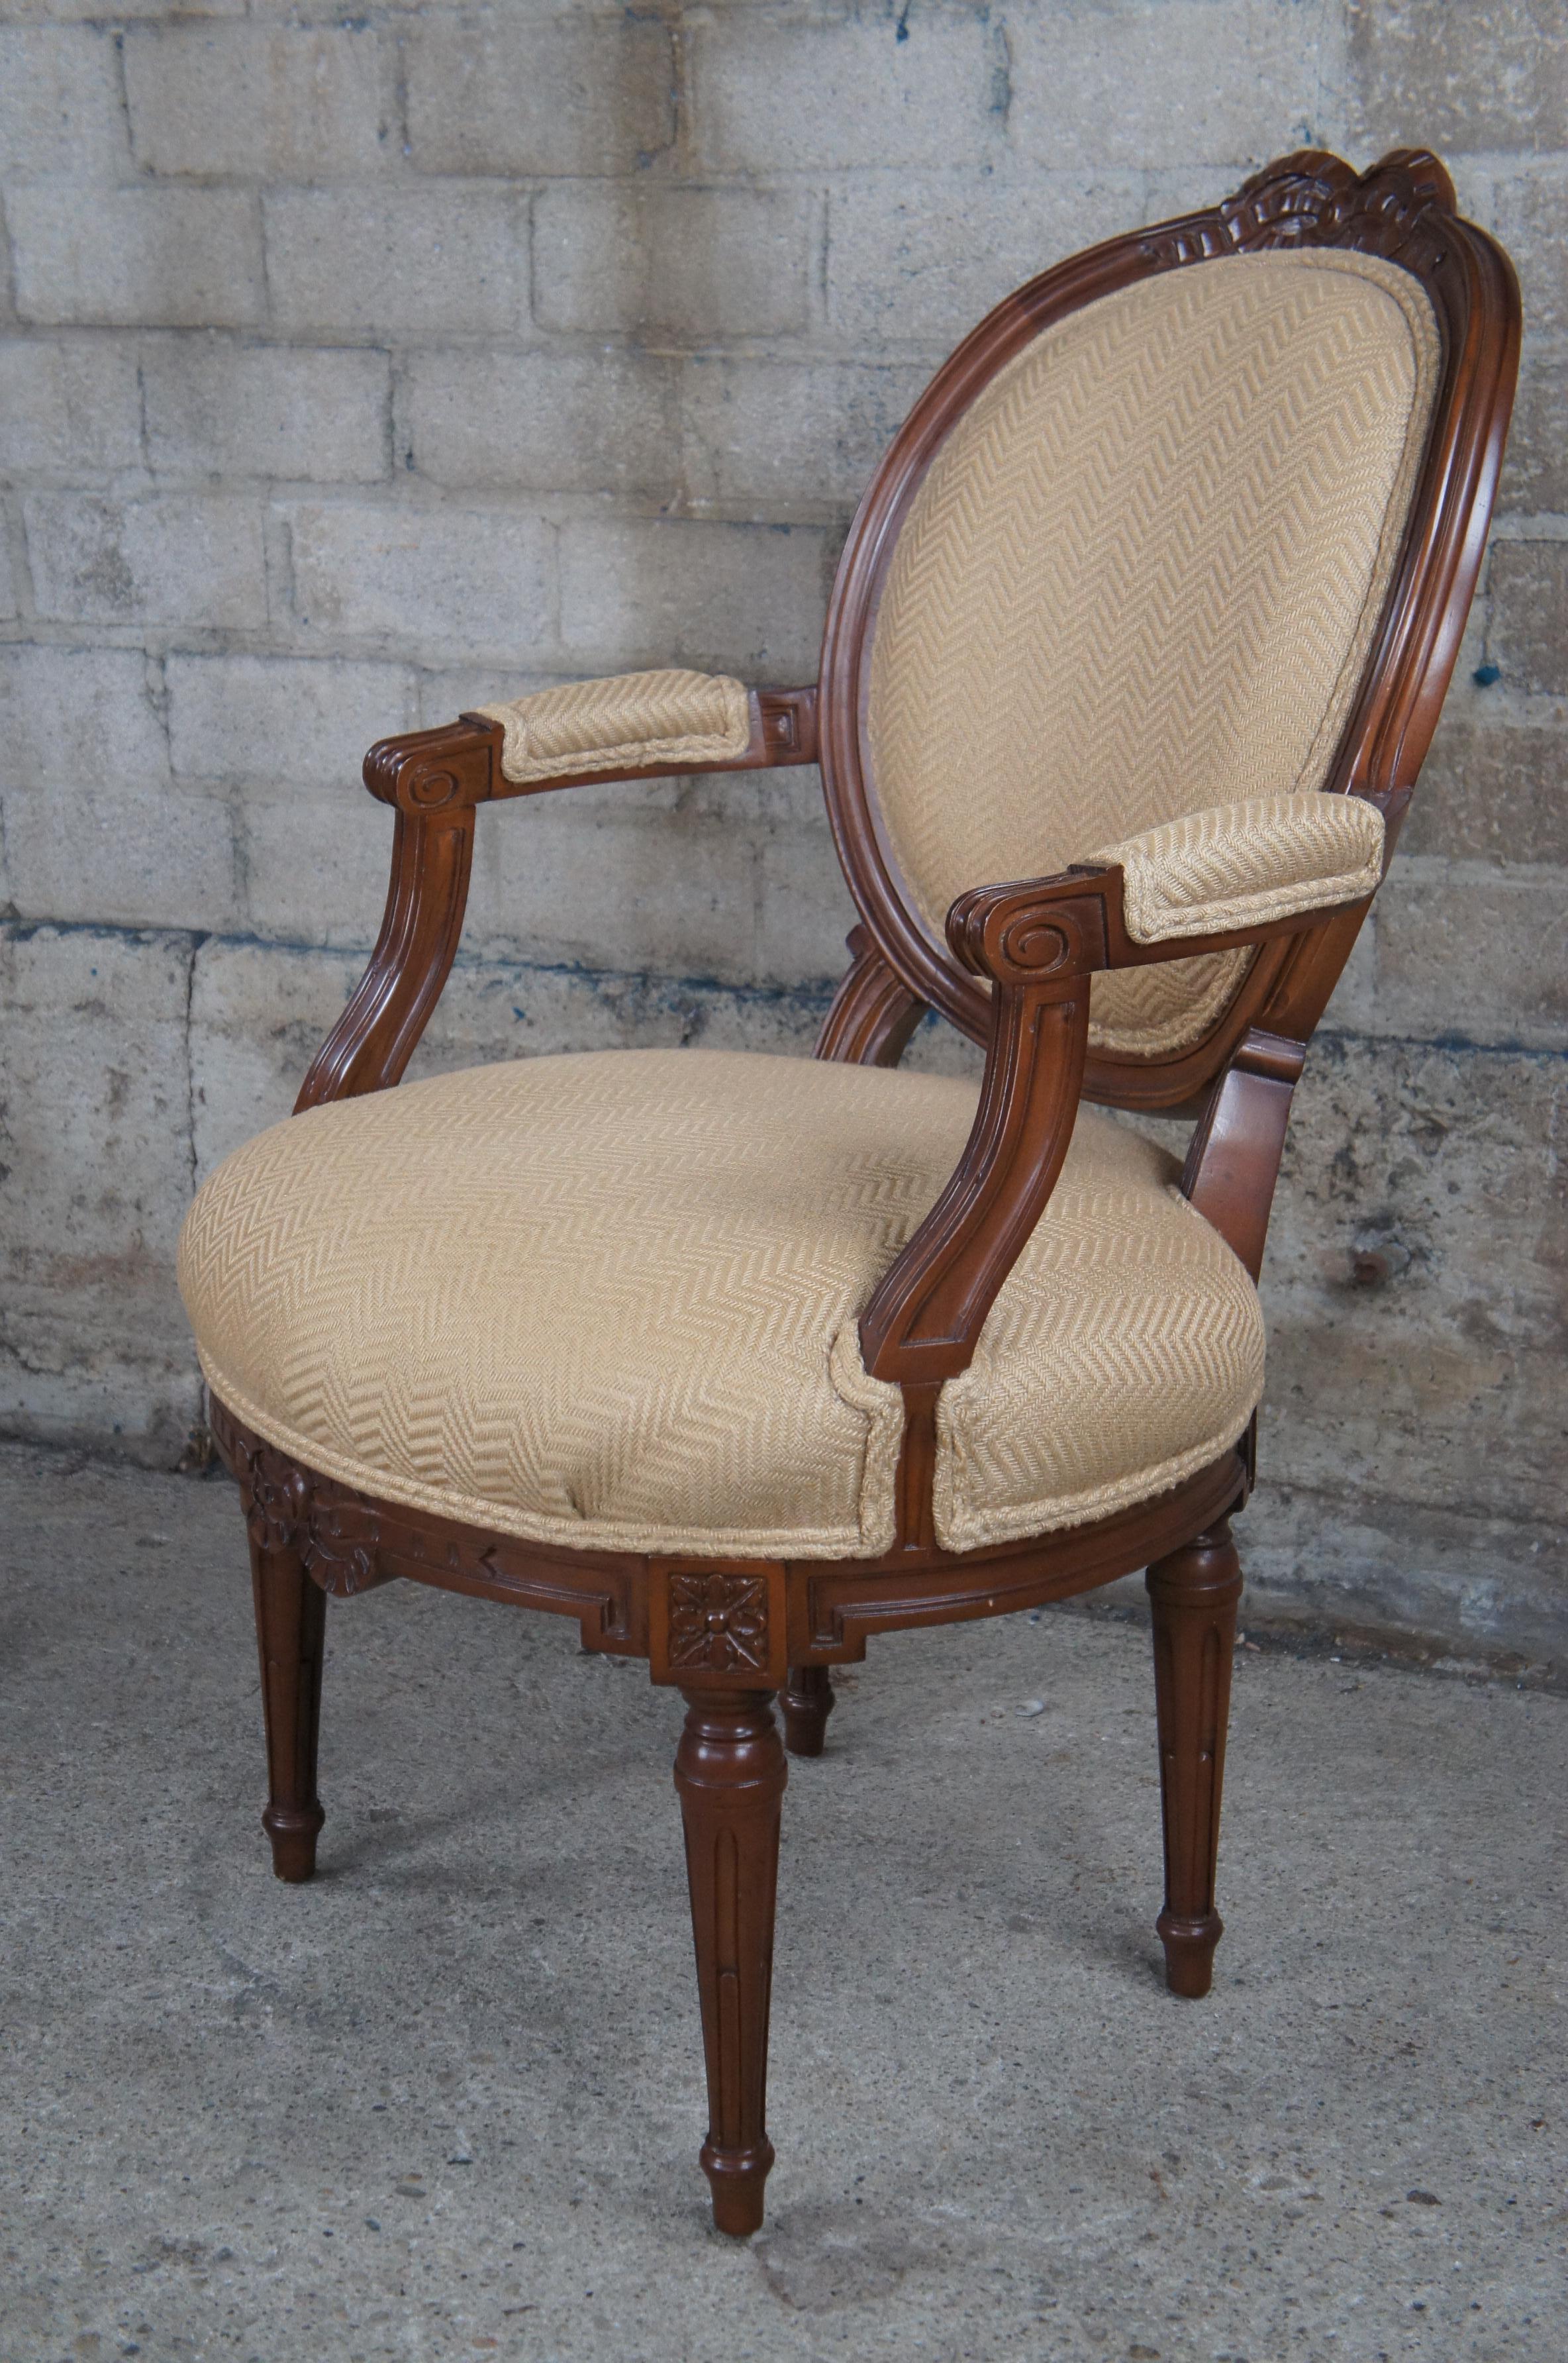 Upholstery Baker McMillen French Louis XVI Neoclassical Ribbon Fauteuil Balloon Back Chair For Sale